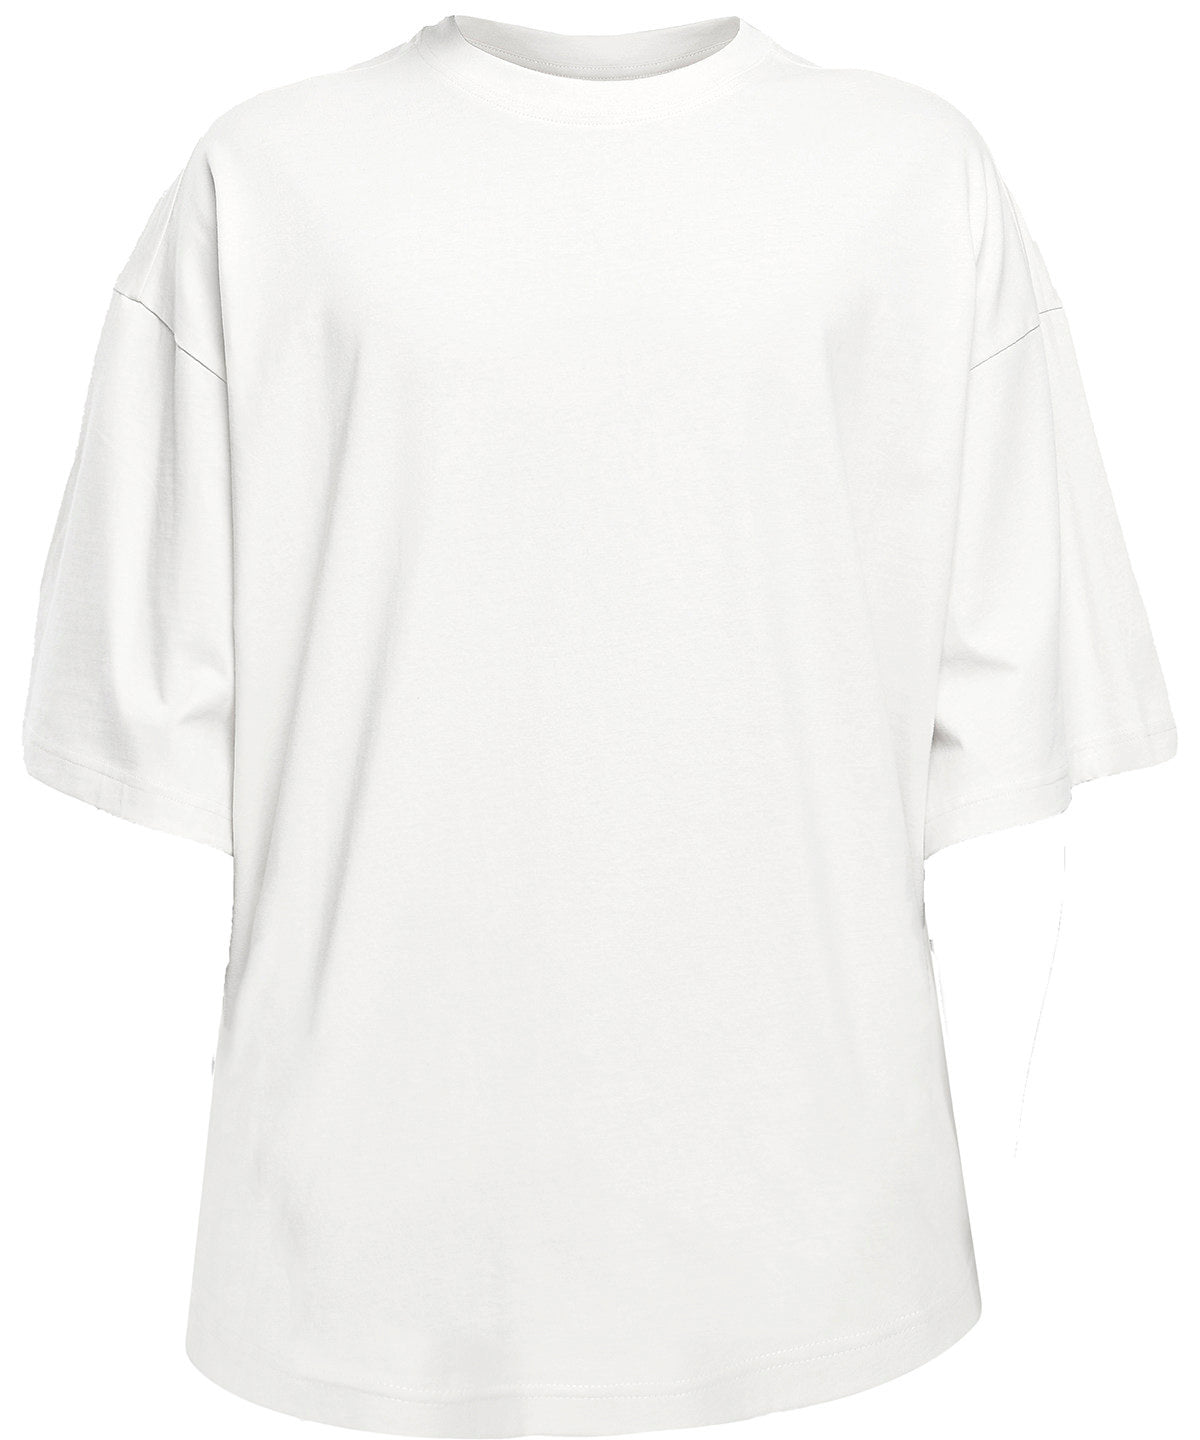 Build your Brand BY193 Huge Oversized casual/urban tee 100% Cotton - COOZO